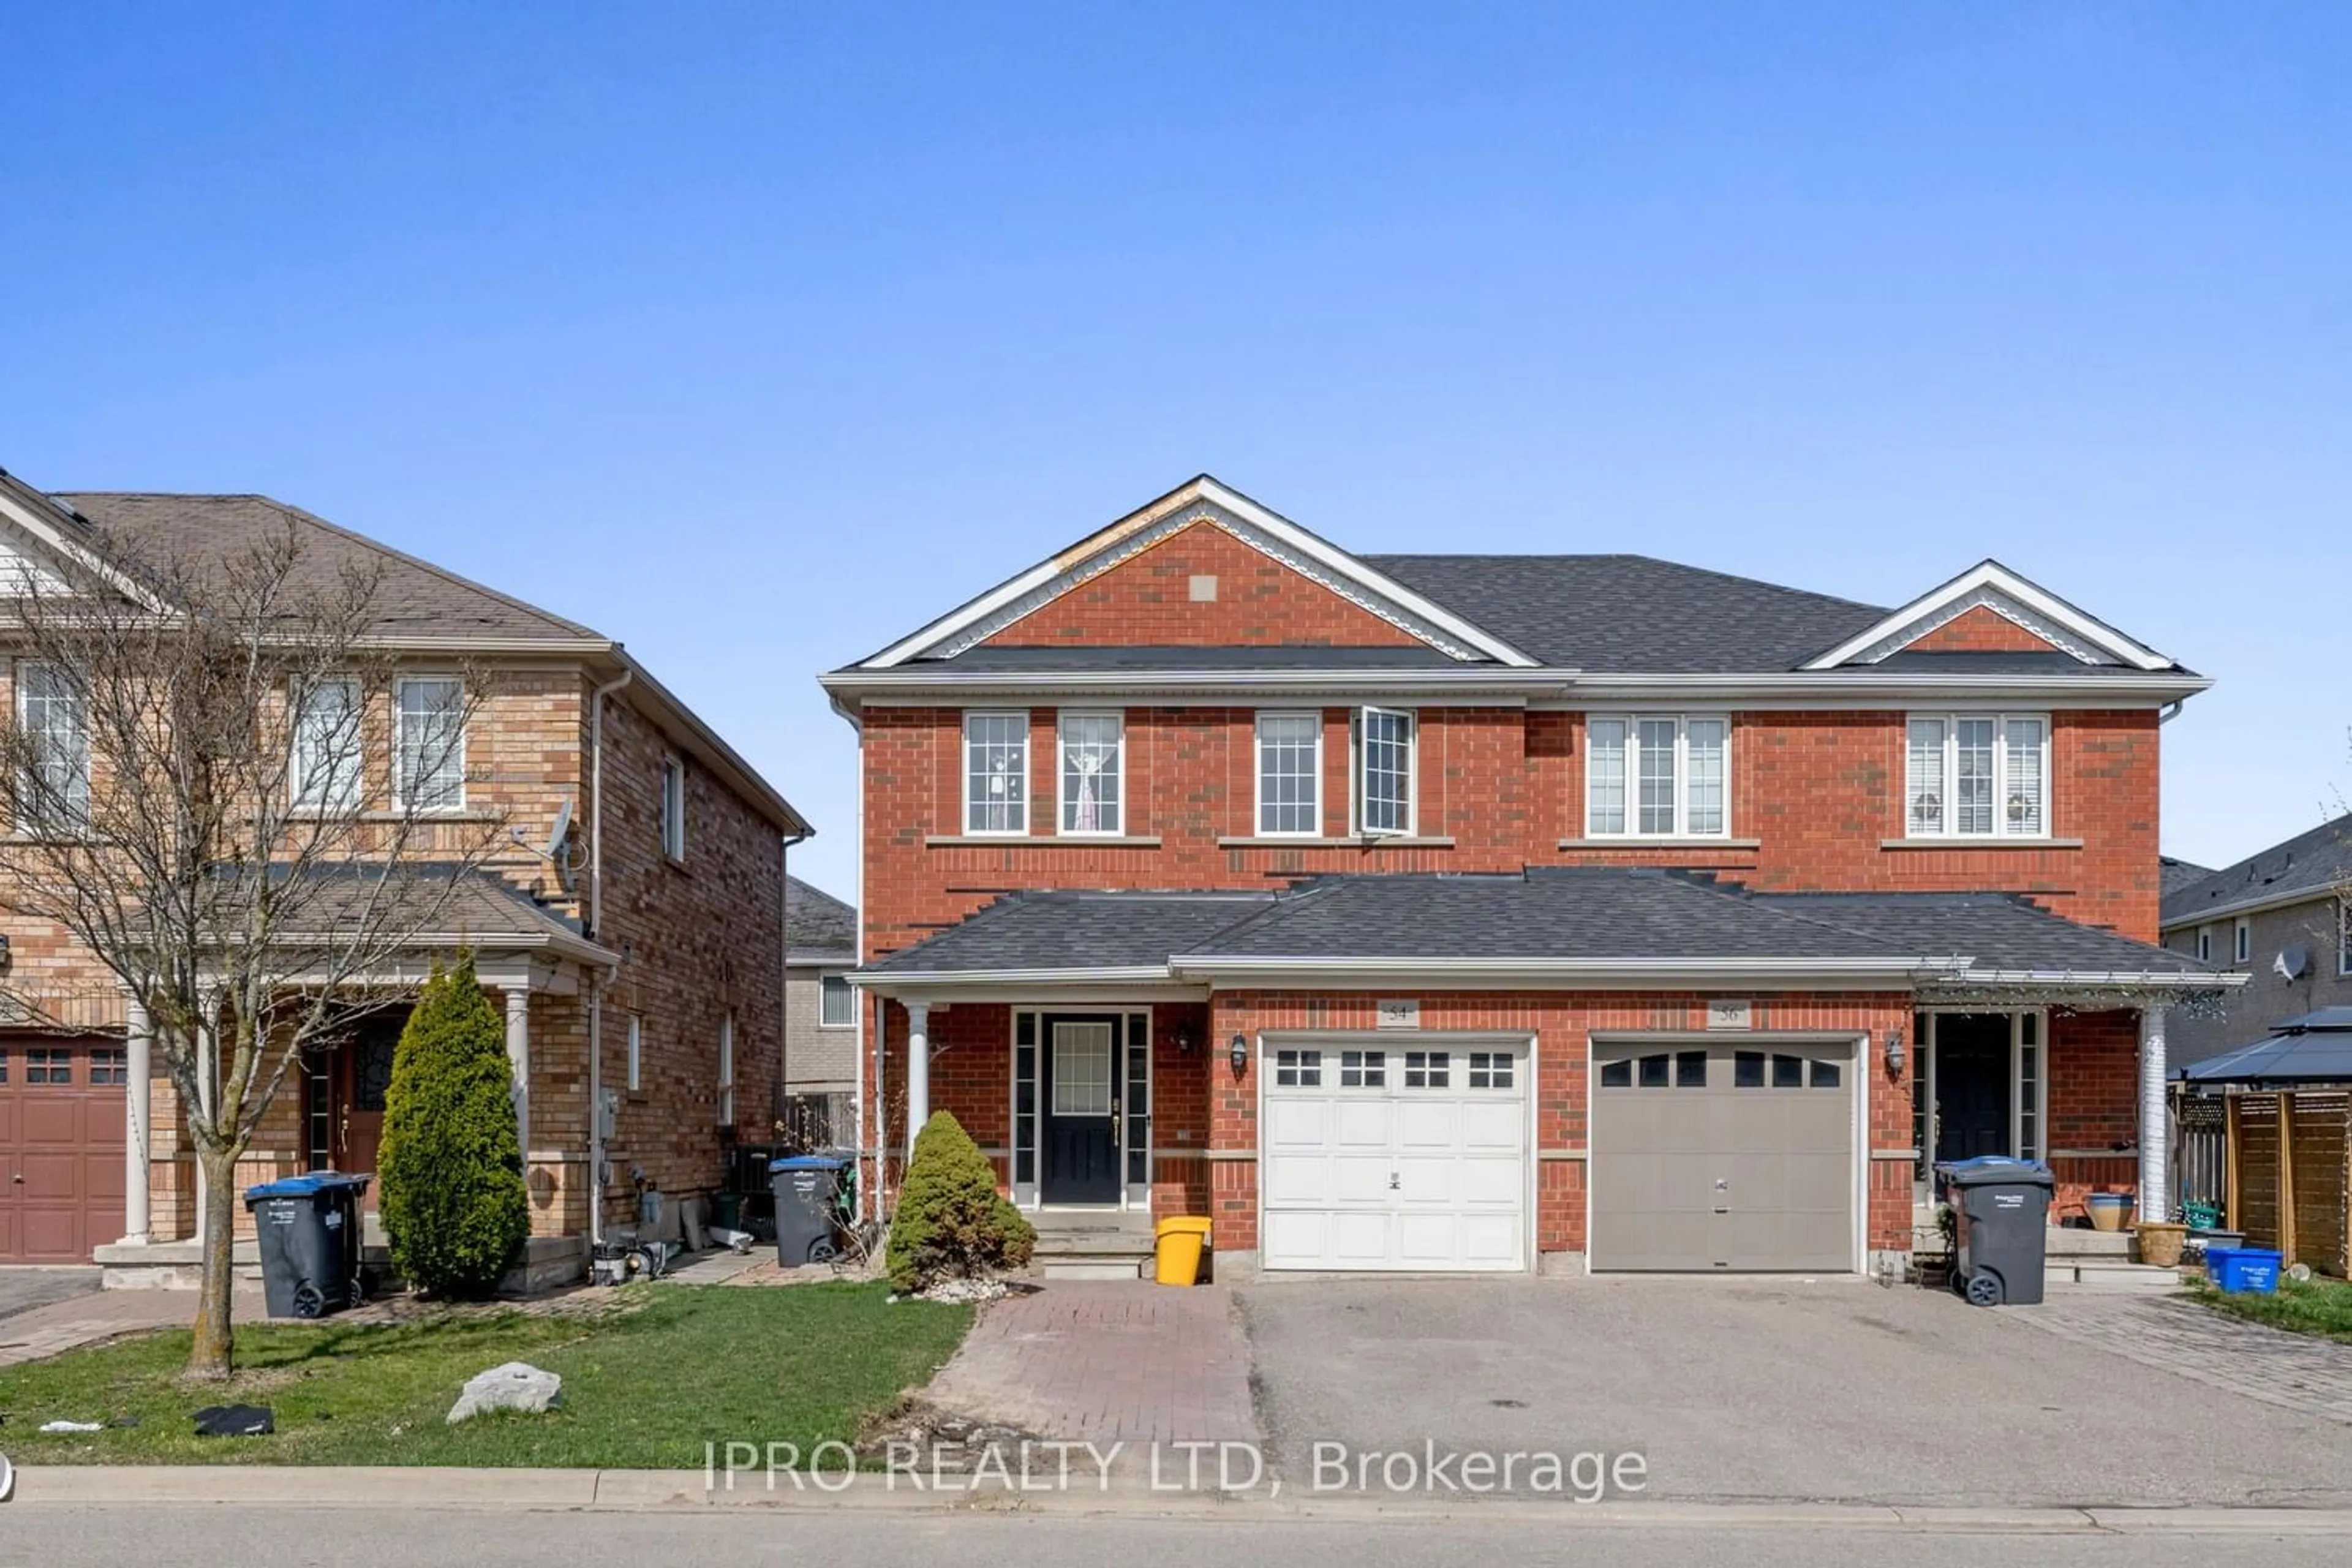 Home with brick exterior material for 54 Crannyfield Dr, Brampton Ontario L7A 3X2